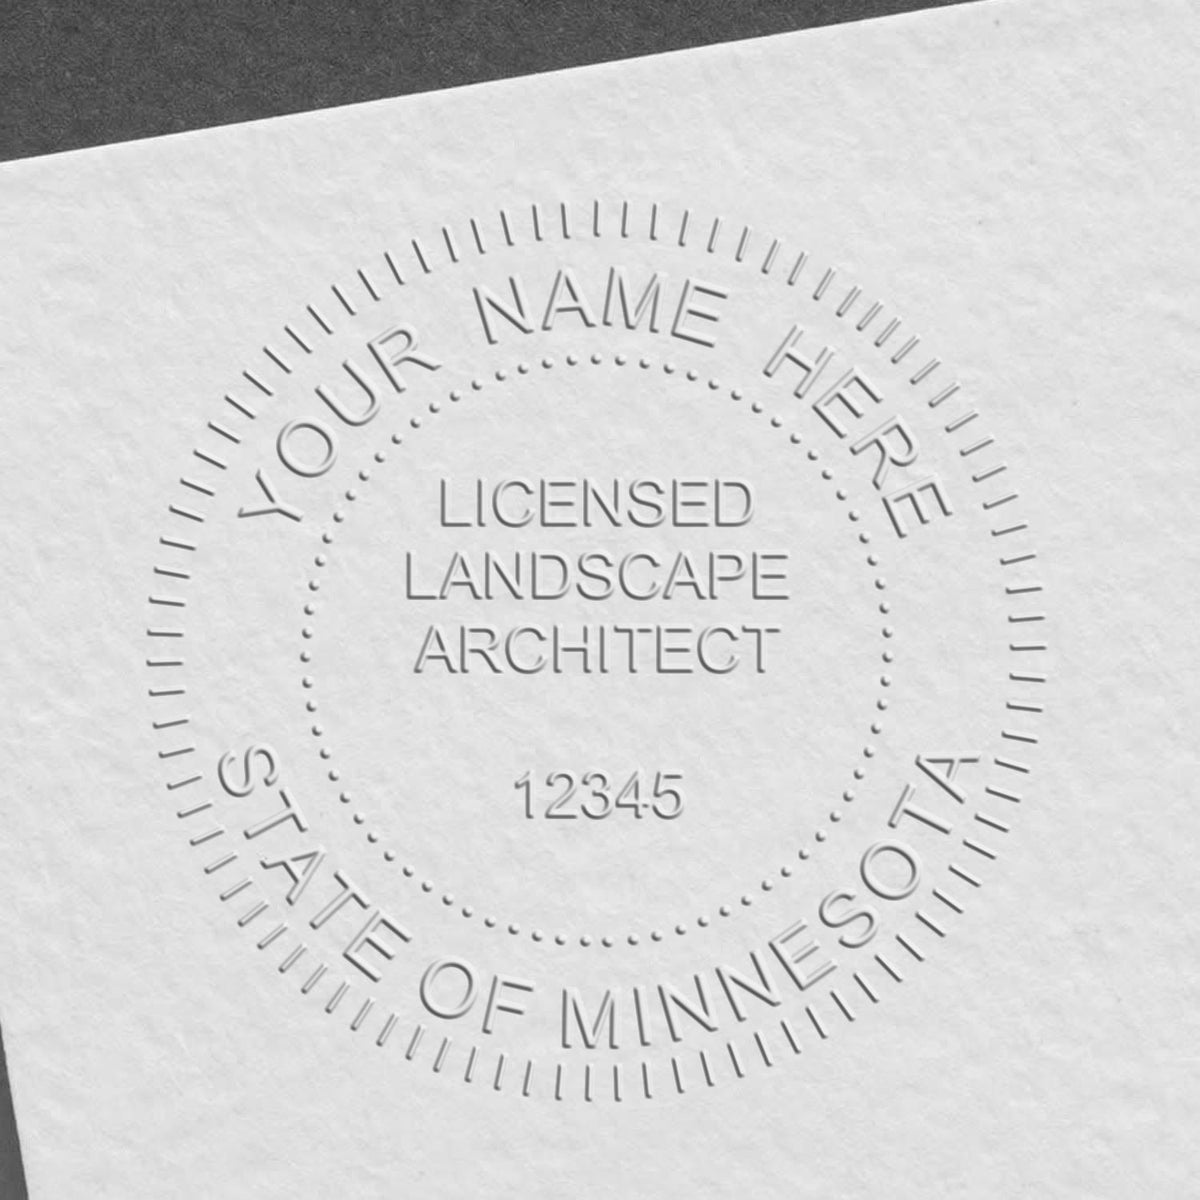 The Soft Pocket Minnesota Landscape Architect Embosser stamp impression comes to life with a crisp, detailed photo on paper - showcasing true professional quality.